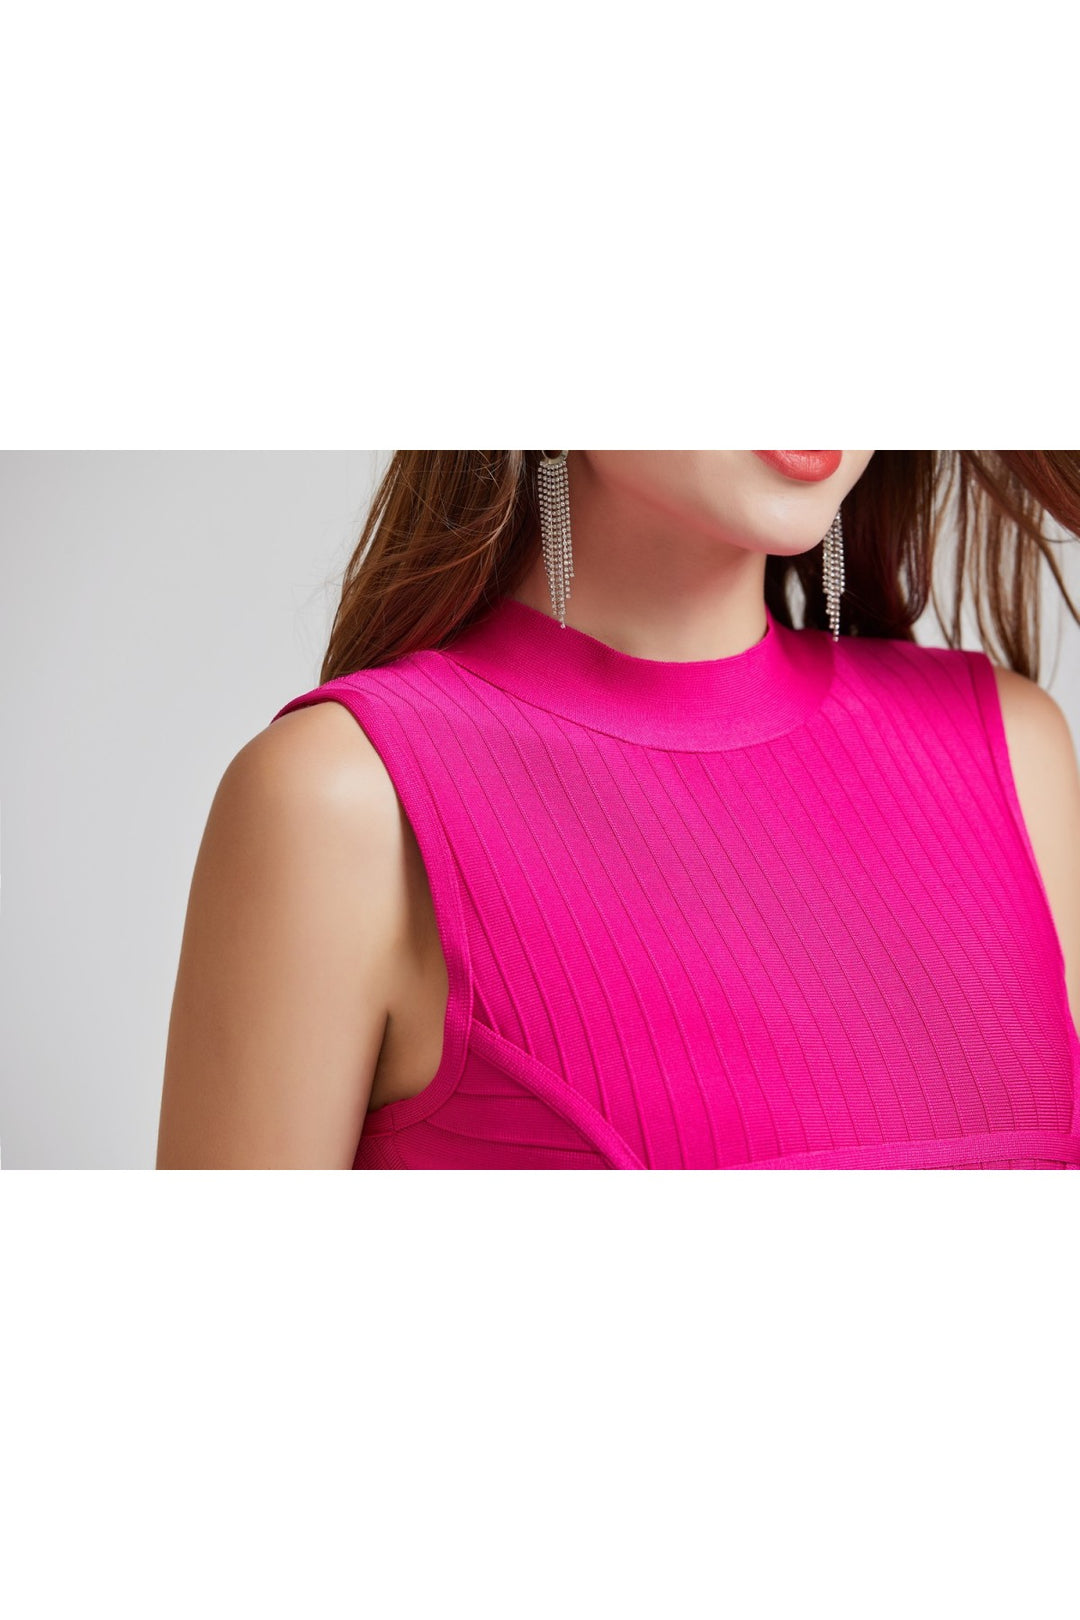 Women's Pink Bandage Bodycon Midi Party Dress - Close Up View